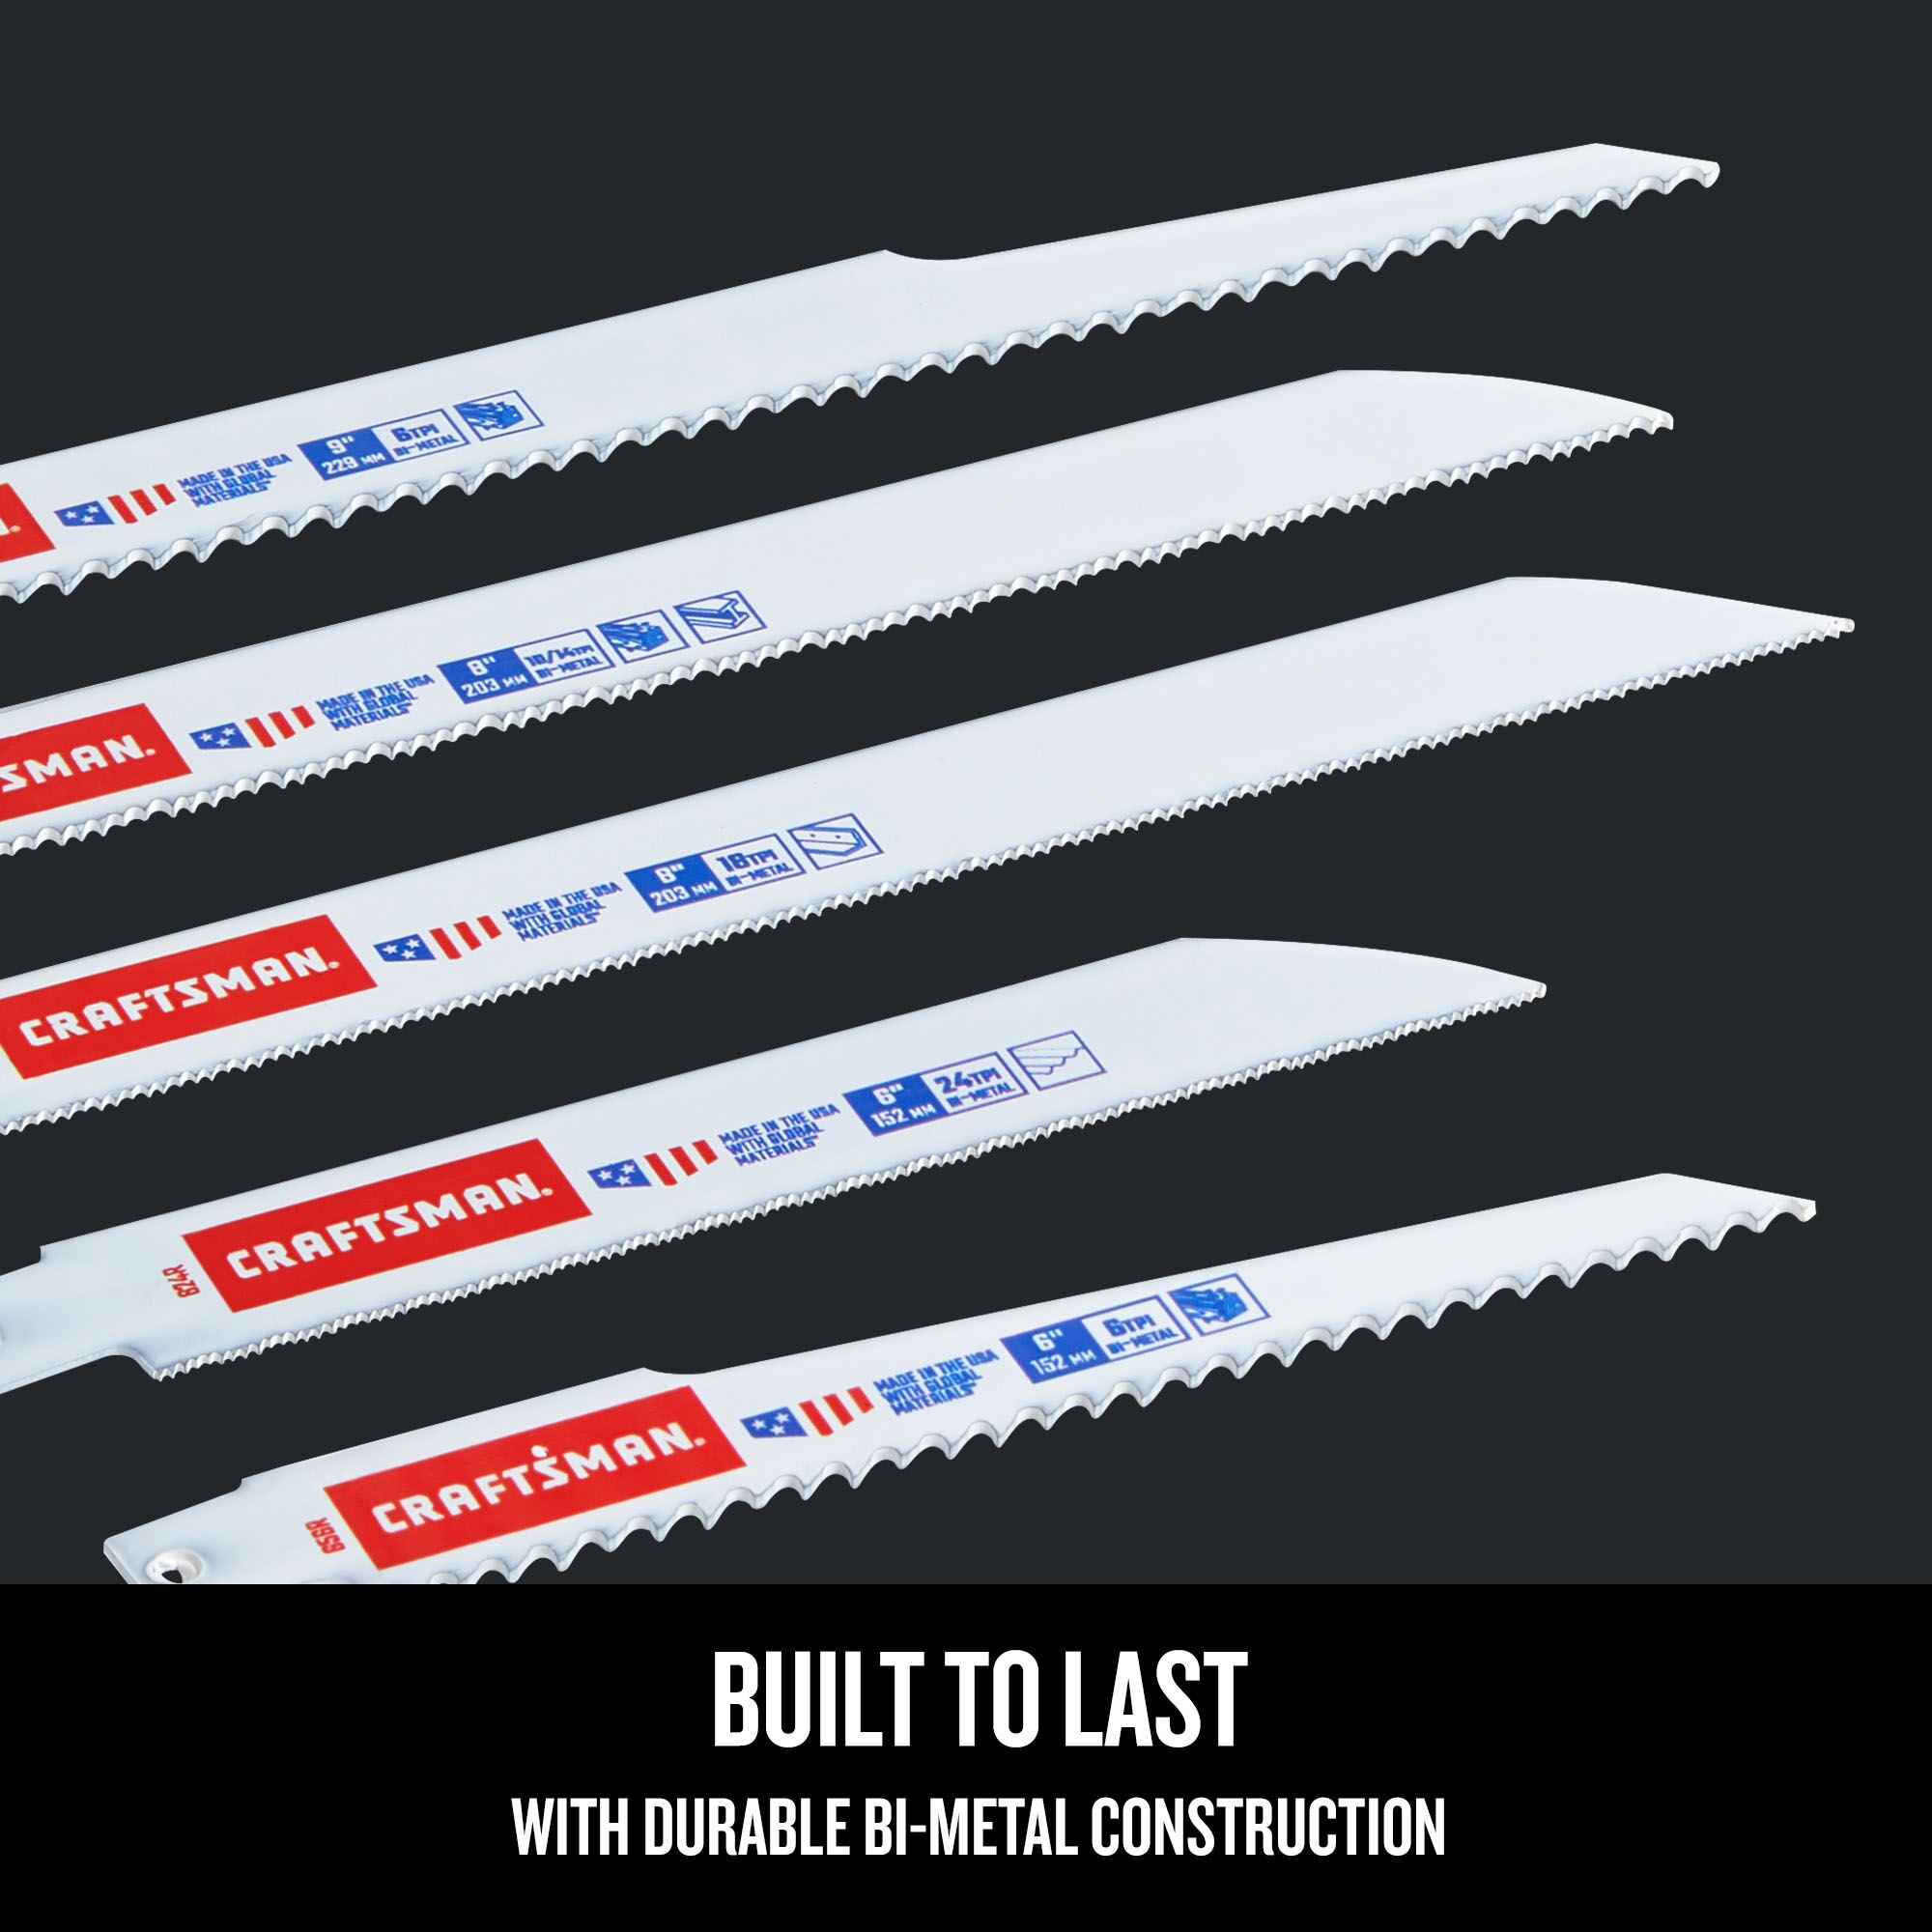 Graphic of CRAFTSMAN Blades: Reciprocating Saw highlighting product features